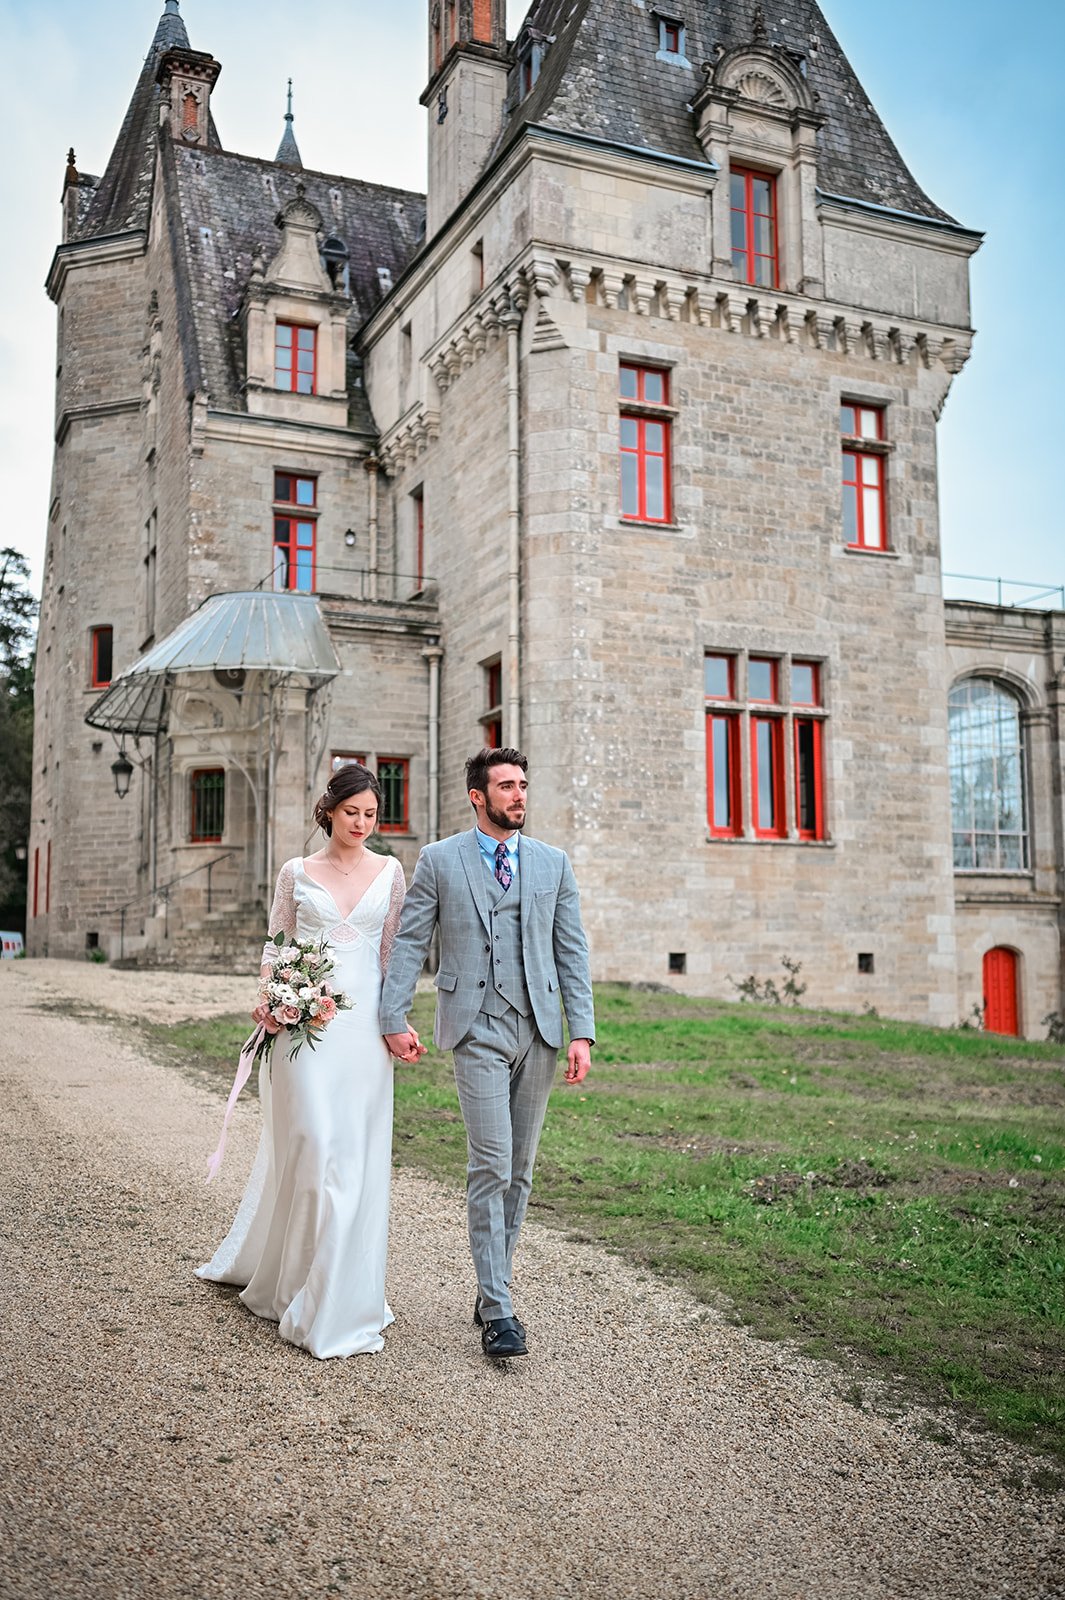 The Grand Chateau of Brittany - French Wedding Venues